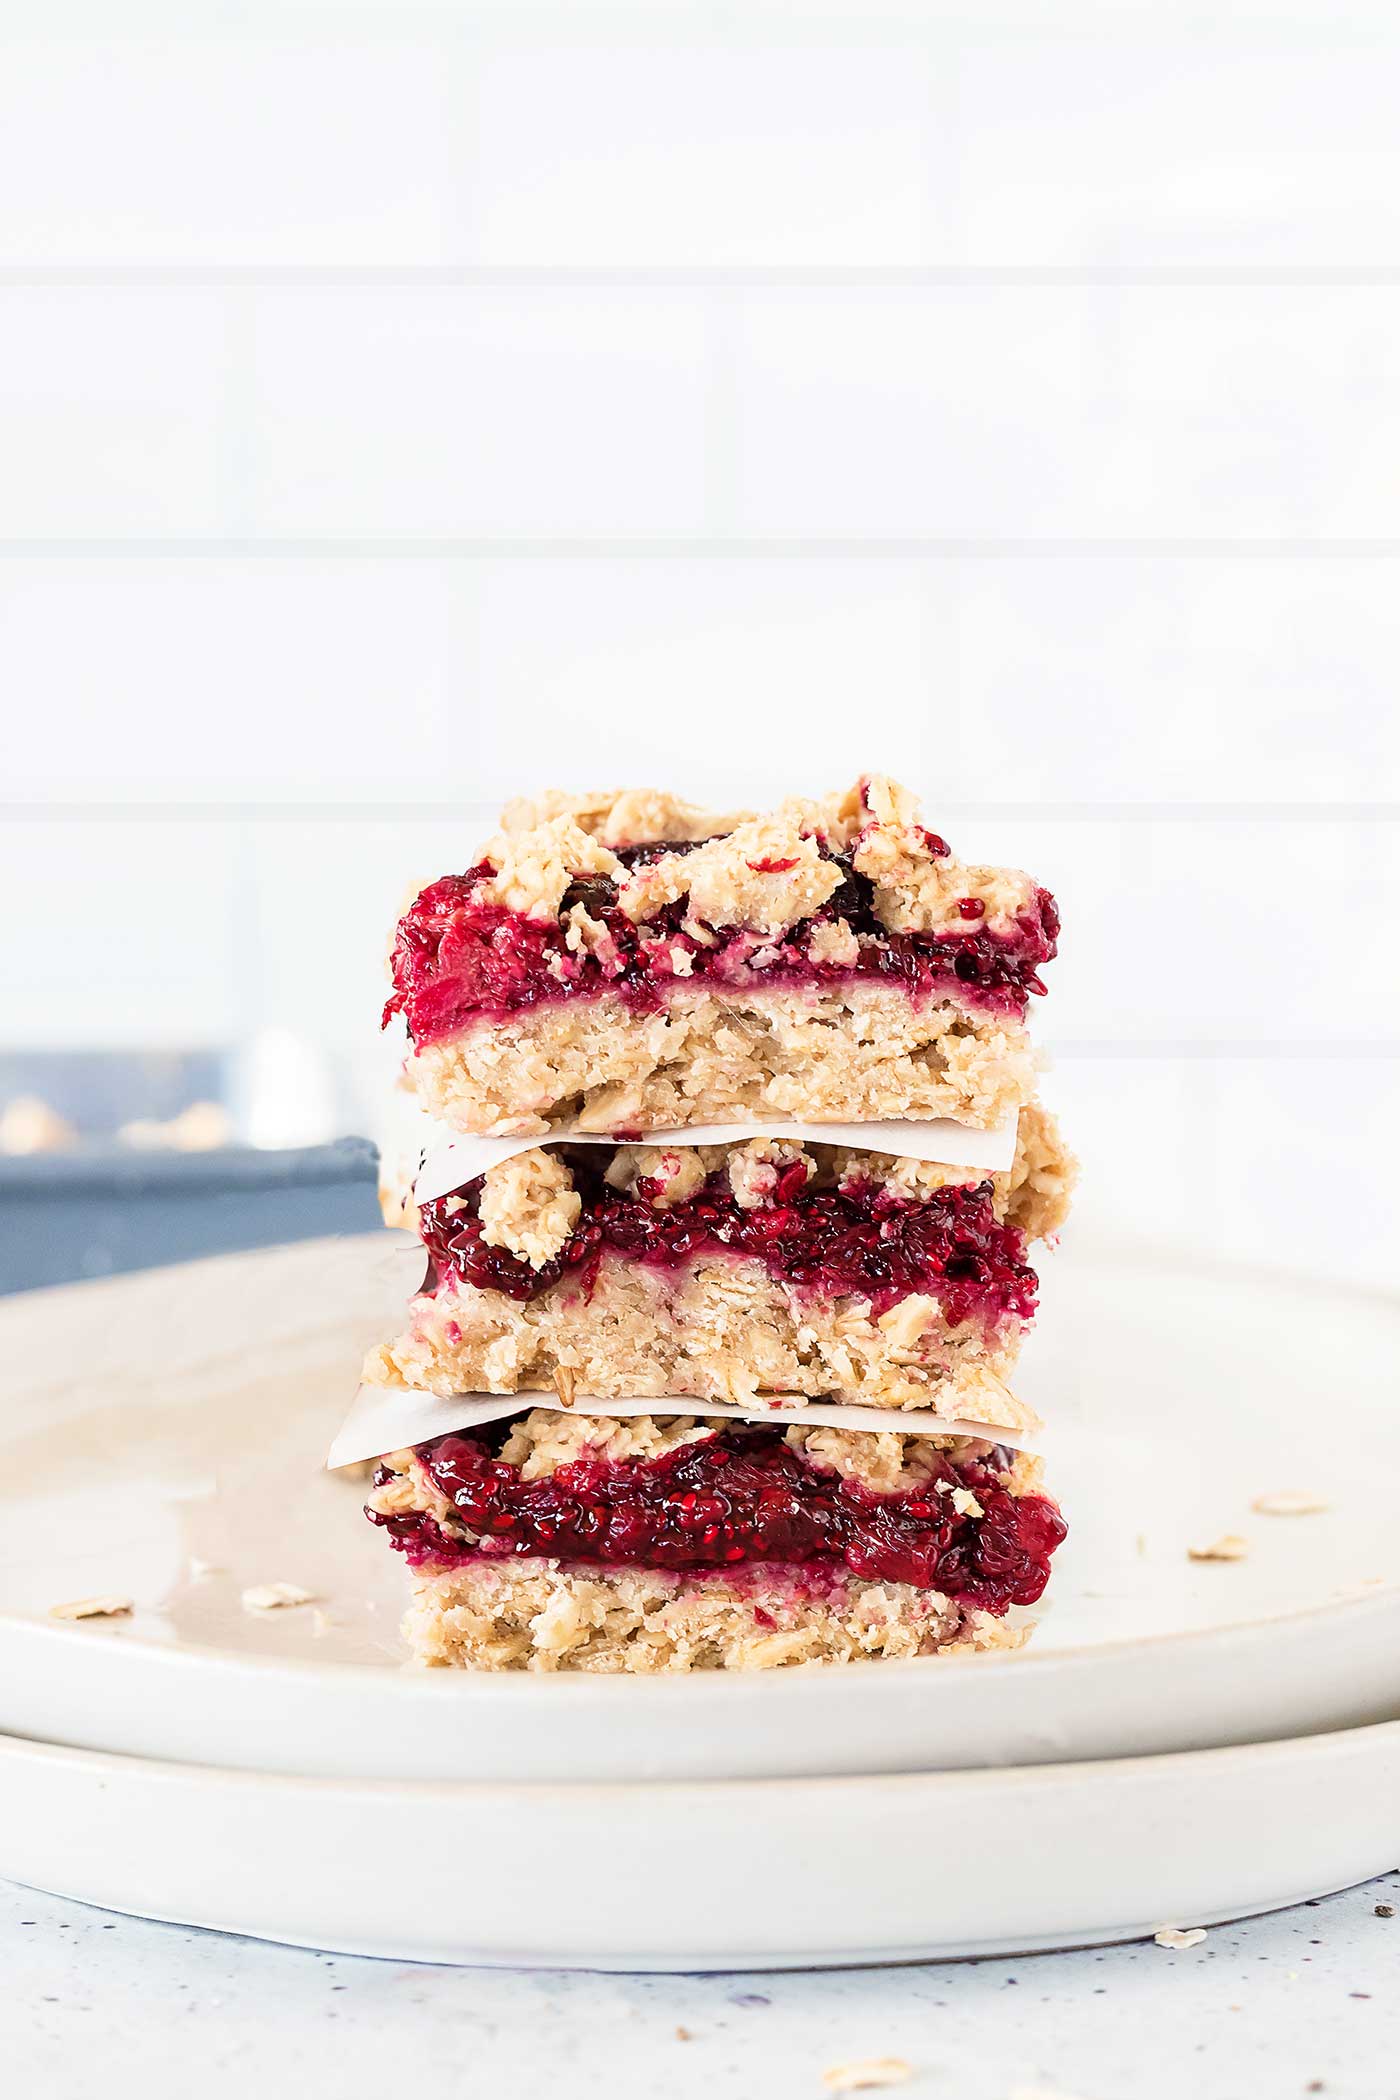 Stack of Oatmeal Bars with Blackberries